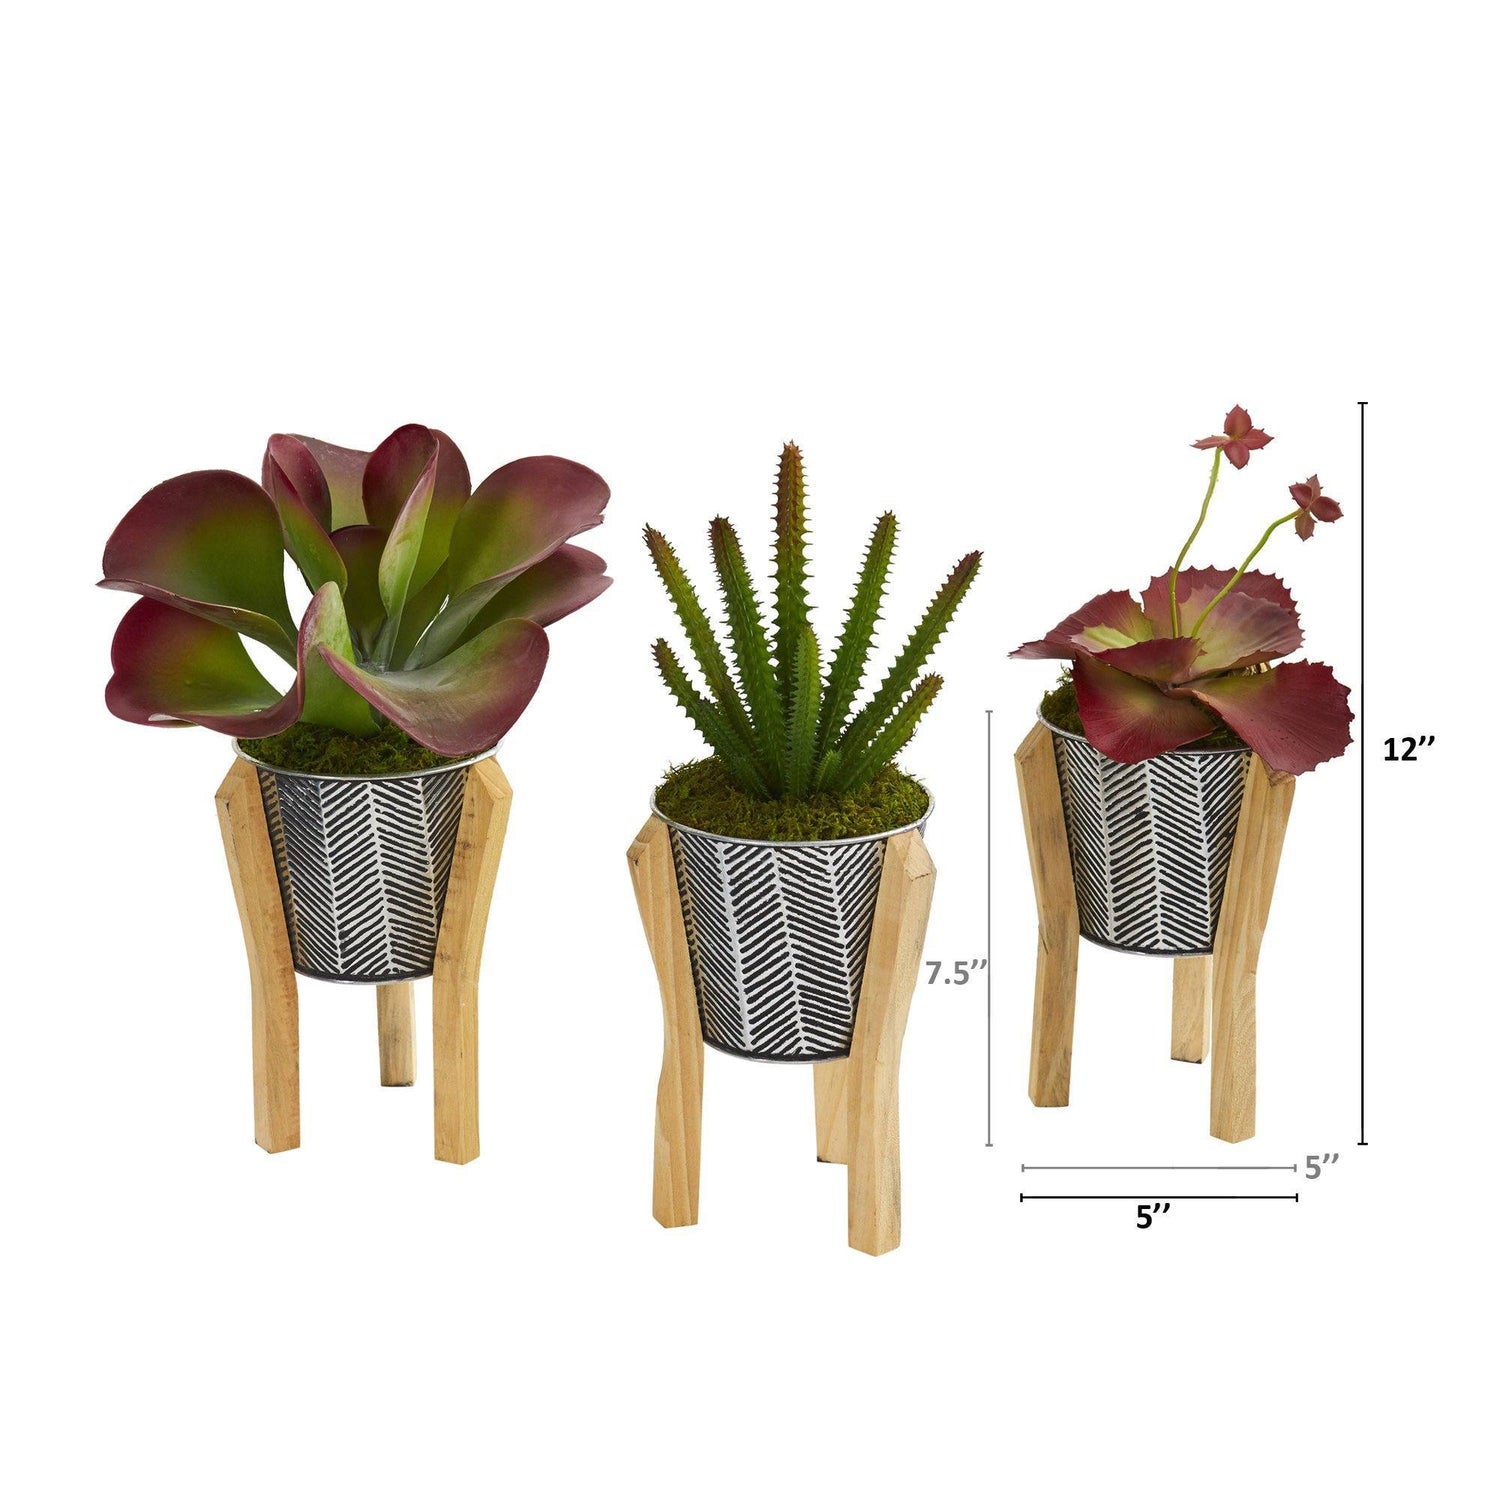 12” Succulent Artificial Plant in Tin Planter with Legs  (Set of 3)